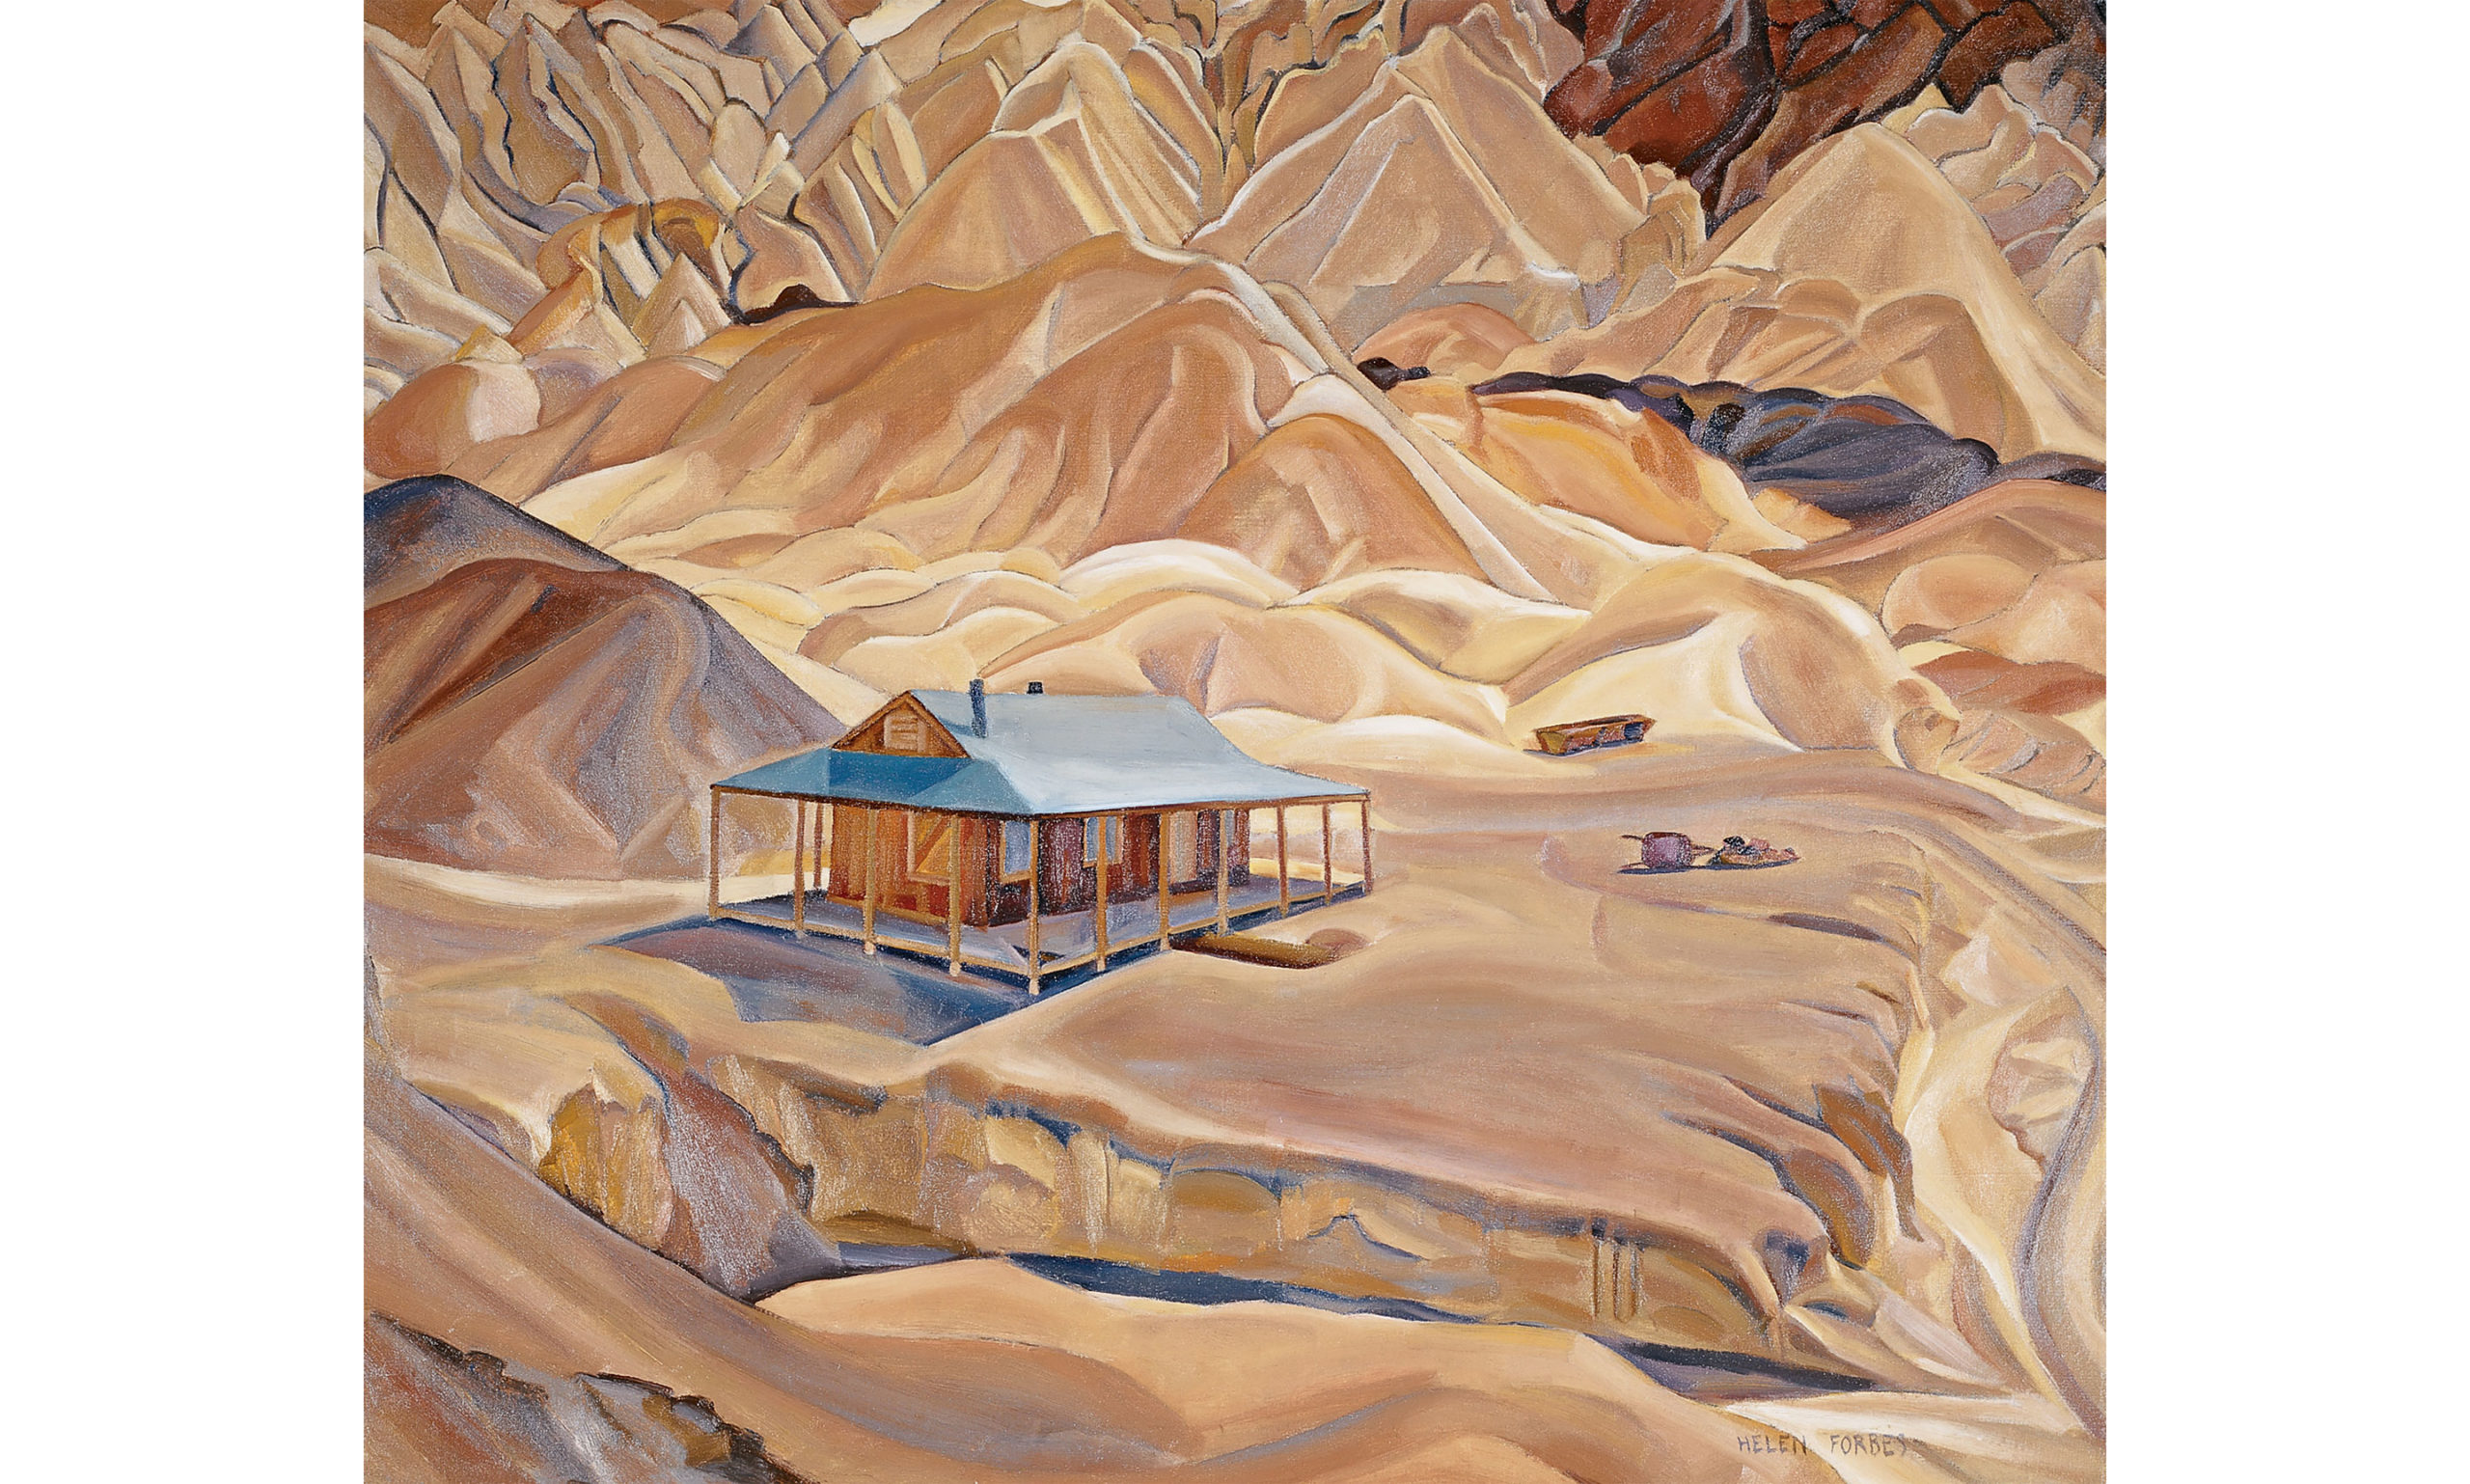 Helen Katharine Forbes, Mountains and Miner’s Shack, 1940. Oil on canvas. The Schoen Collection: American Scene Painting; Courtesy of the Georgia Museum of Art, University of Georgia.